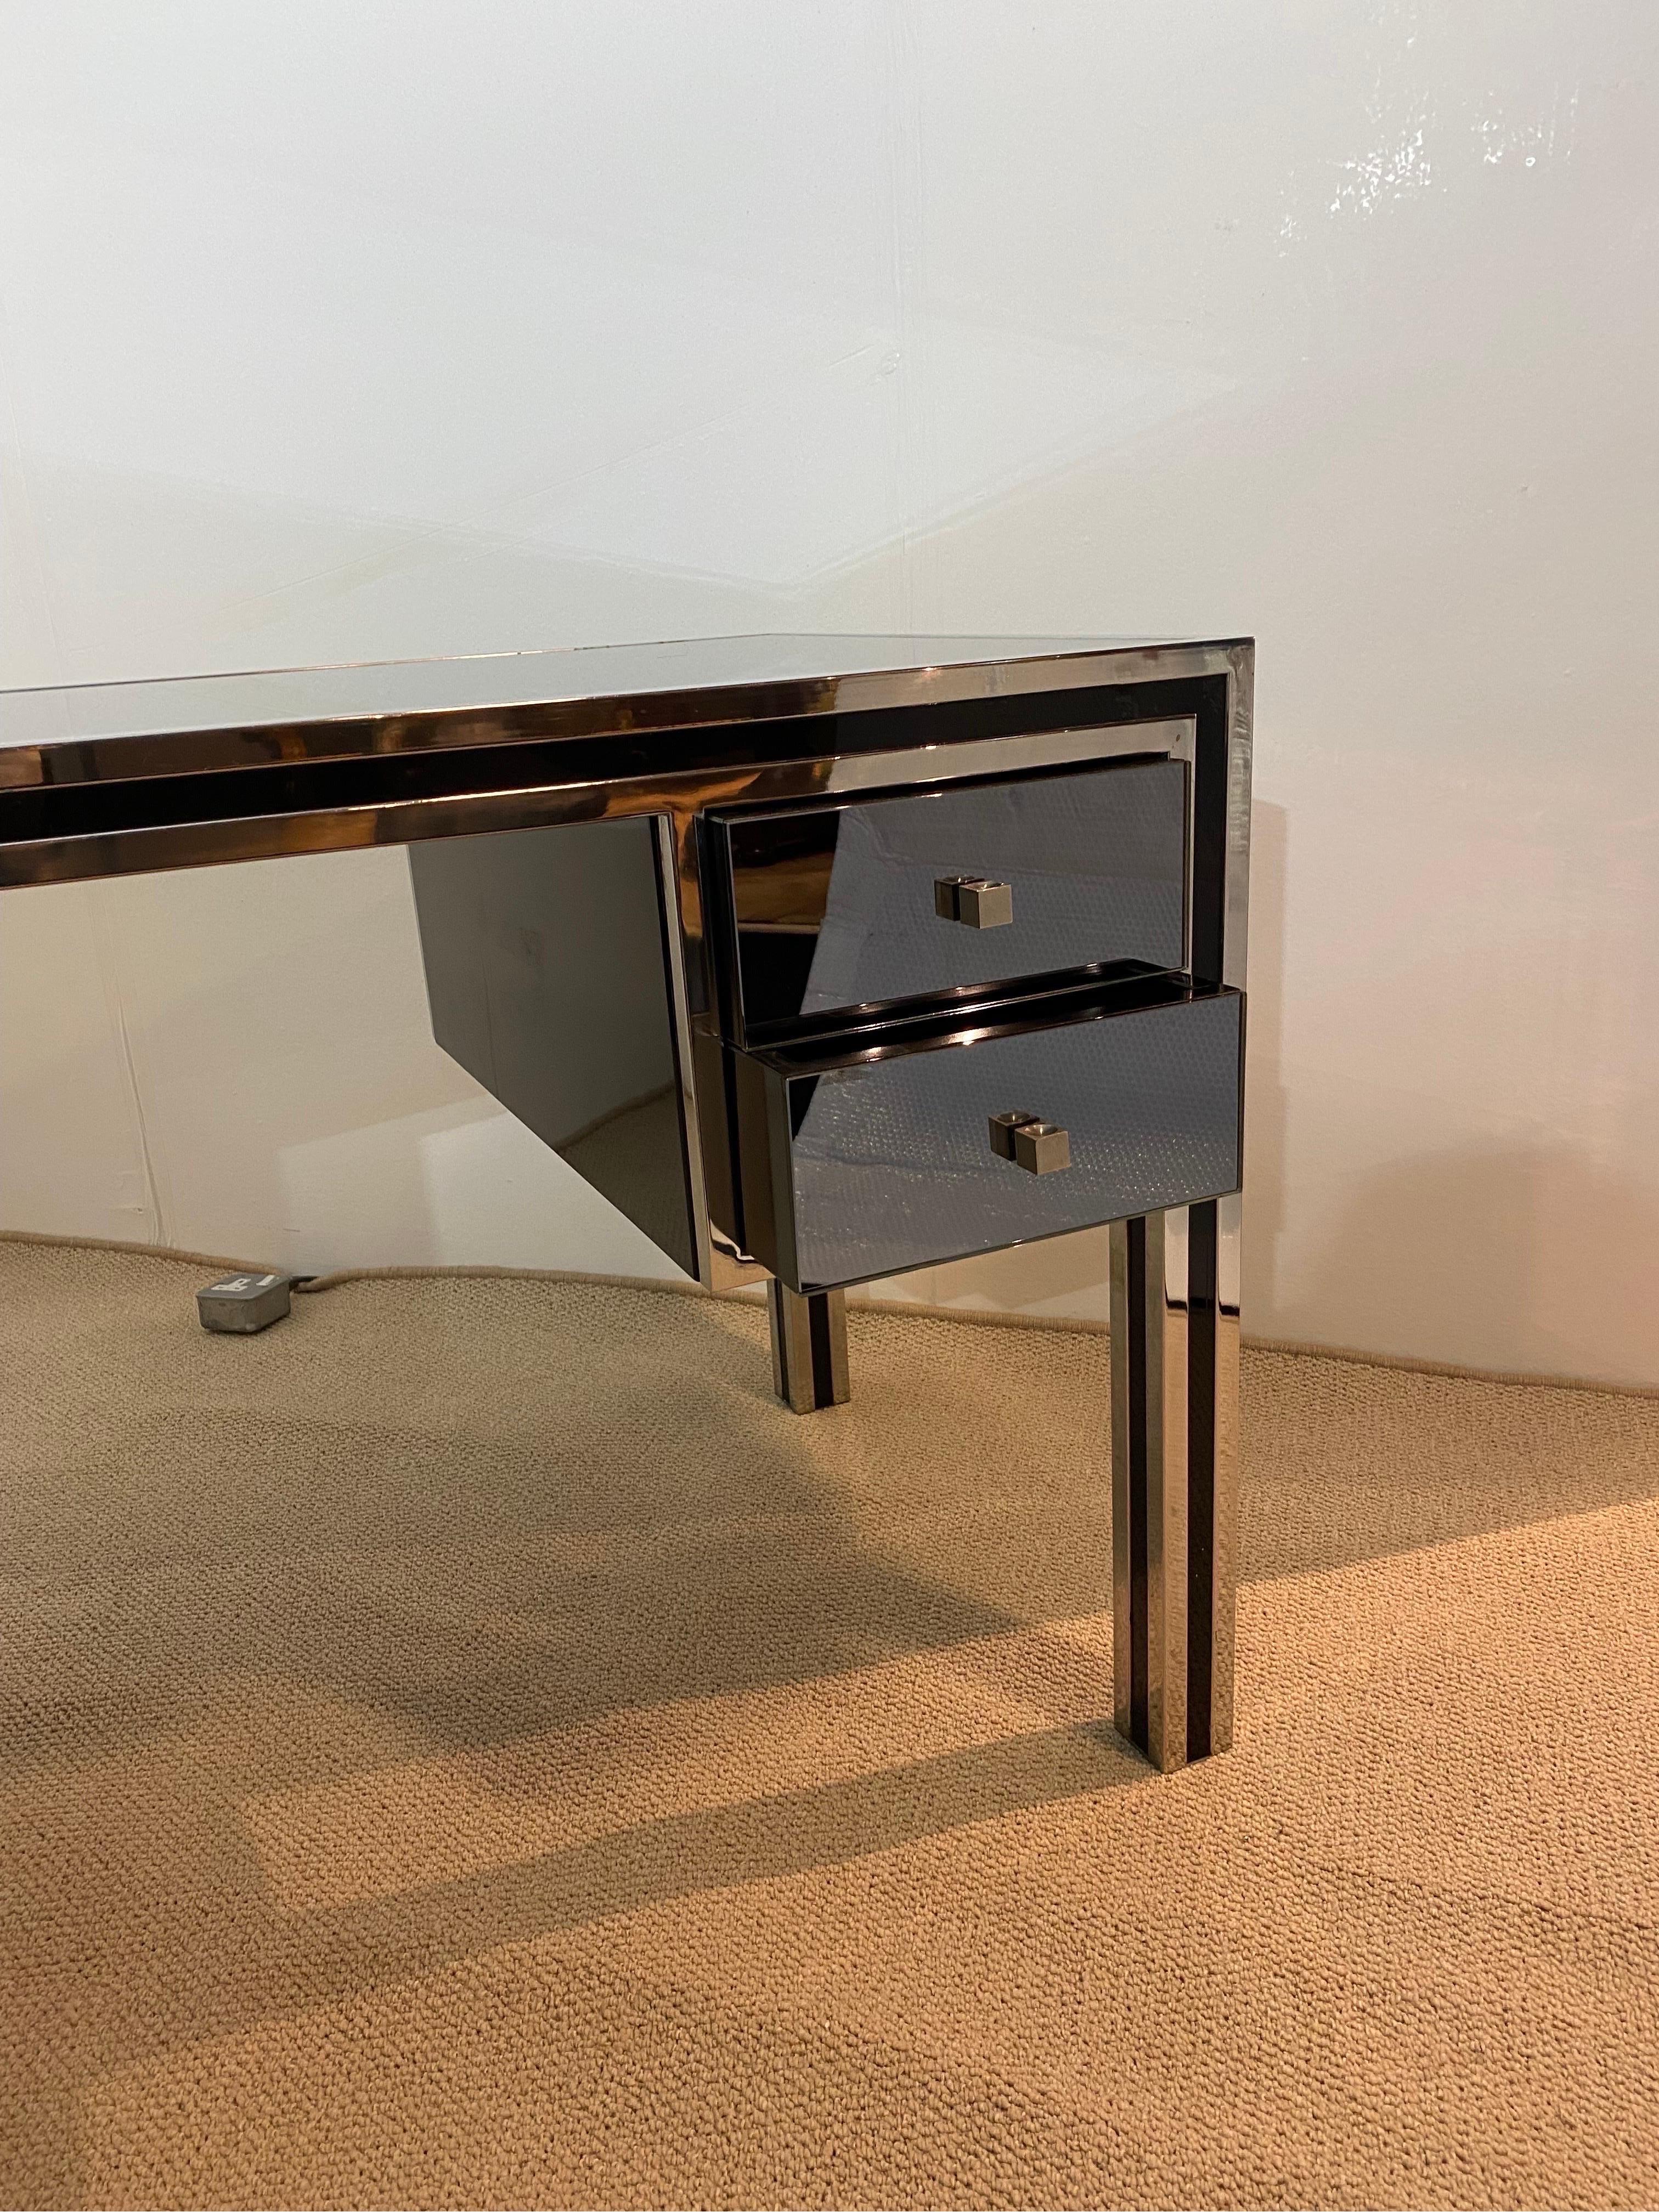 Glass Michelle Pigneres 1970s Desk Chrome Smoked Mirrored Table Art Deco Style office  For Sale